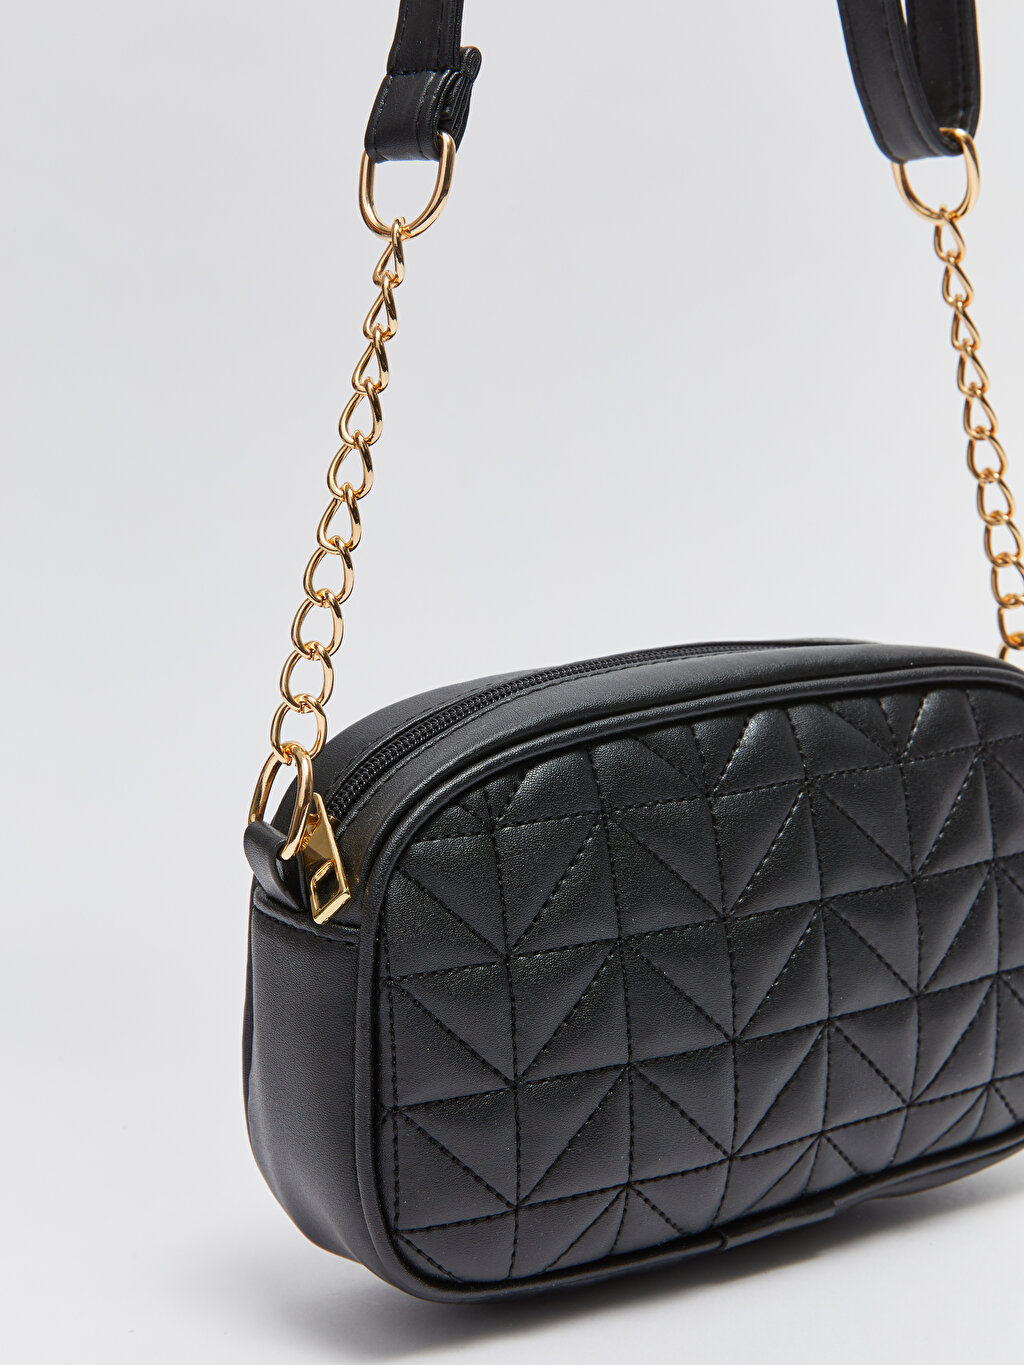 Black Leather-Look Quilted Chain Strap Cross Body Bag